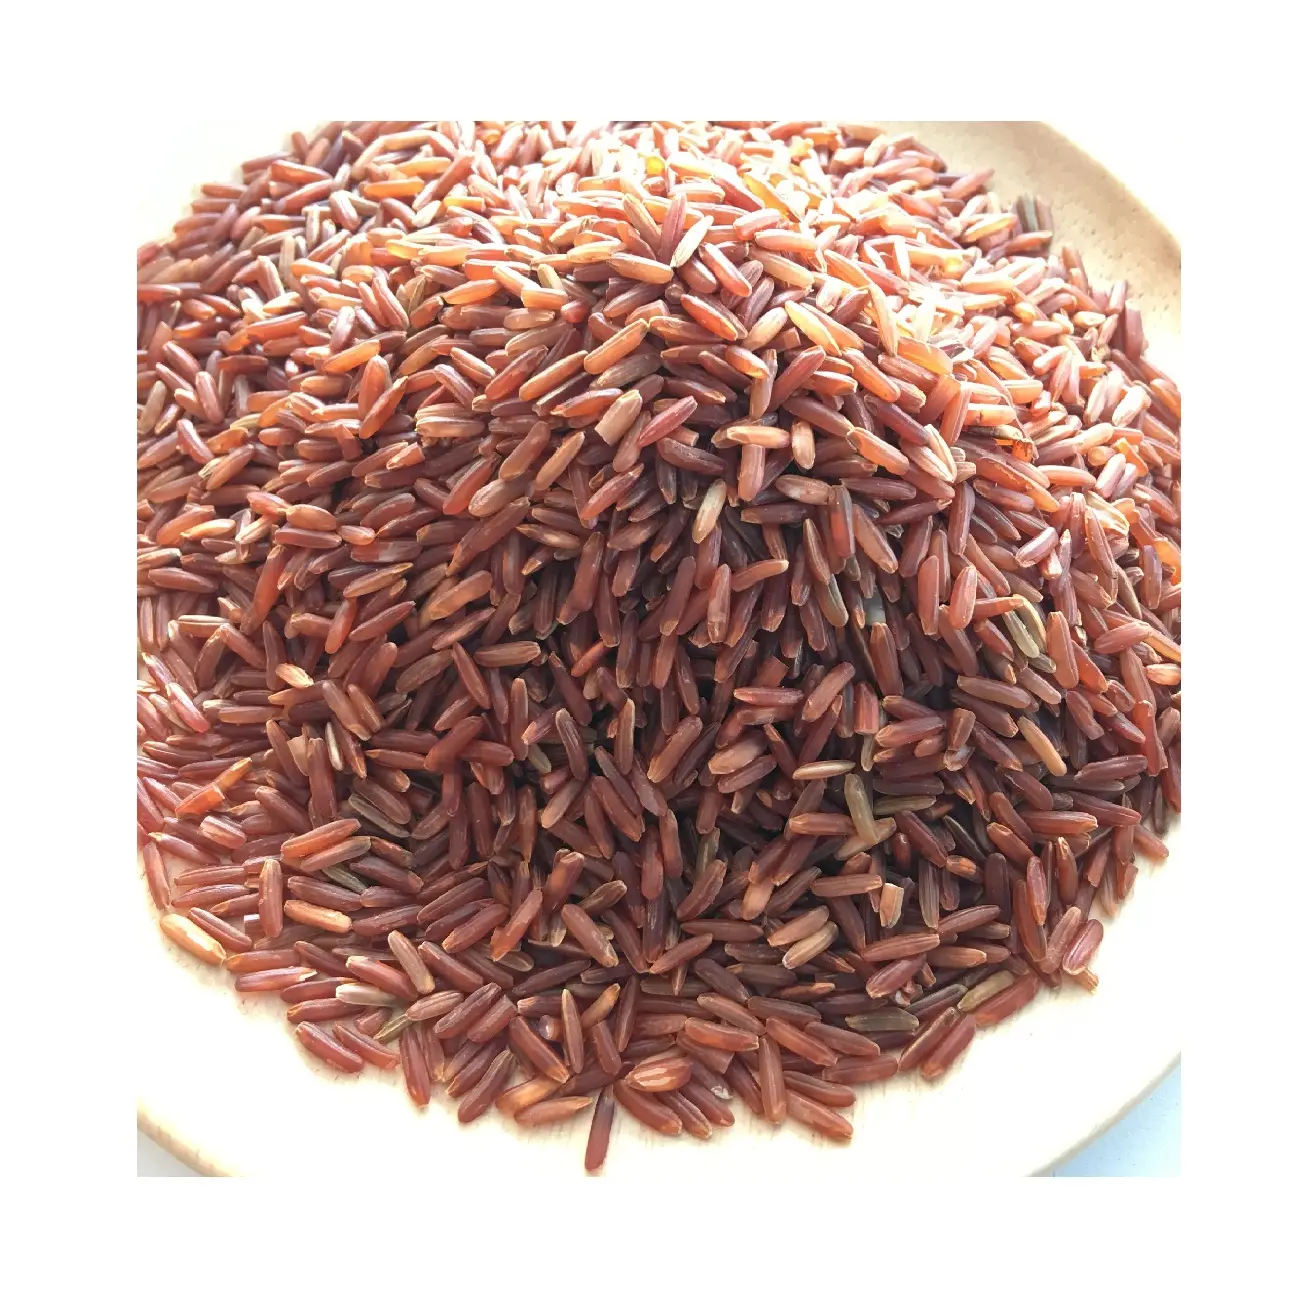 Brown Rice - Brown Rice Flour Use For Diet/ Red Brown Rice From Vietnam High Quality Cheap Price 99 Gold Data